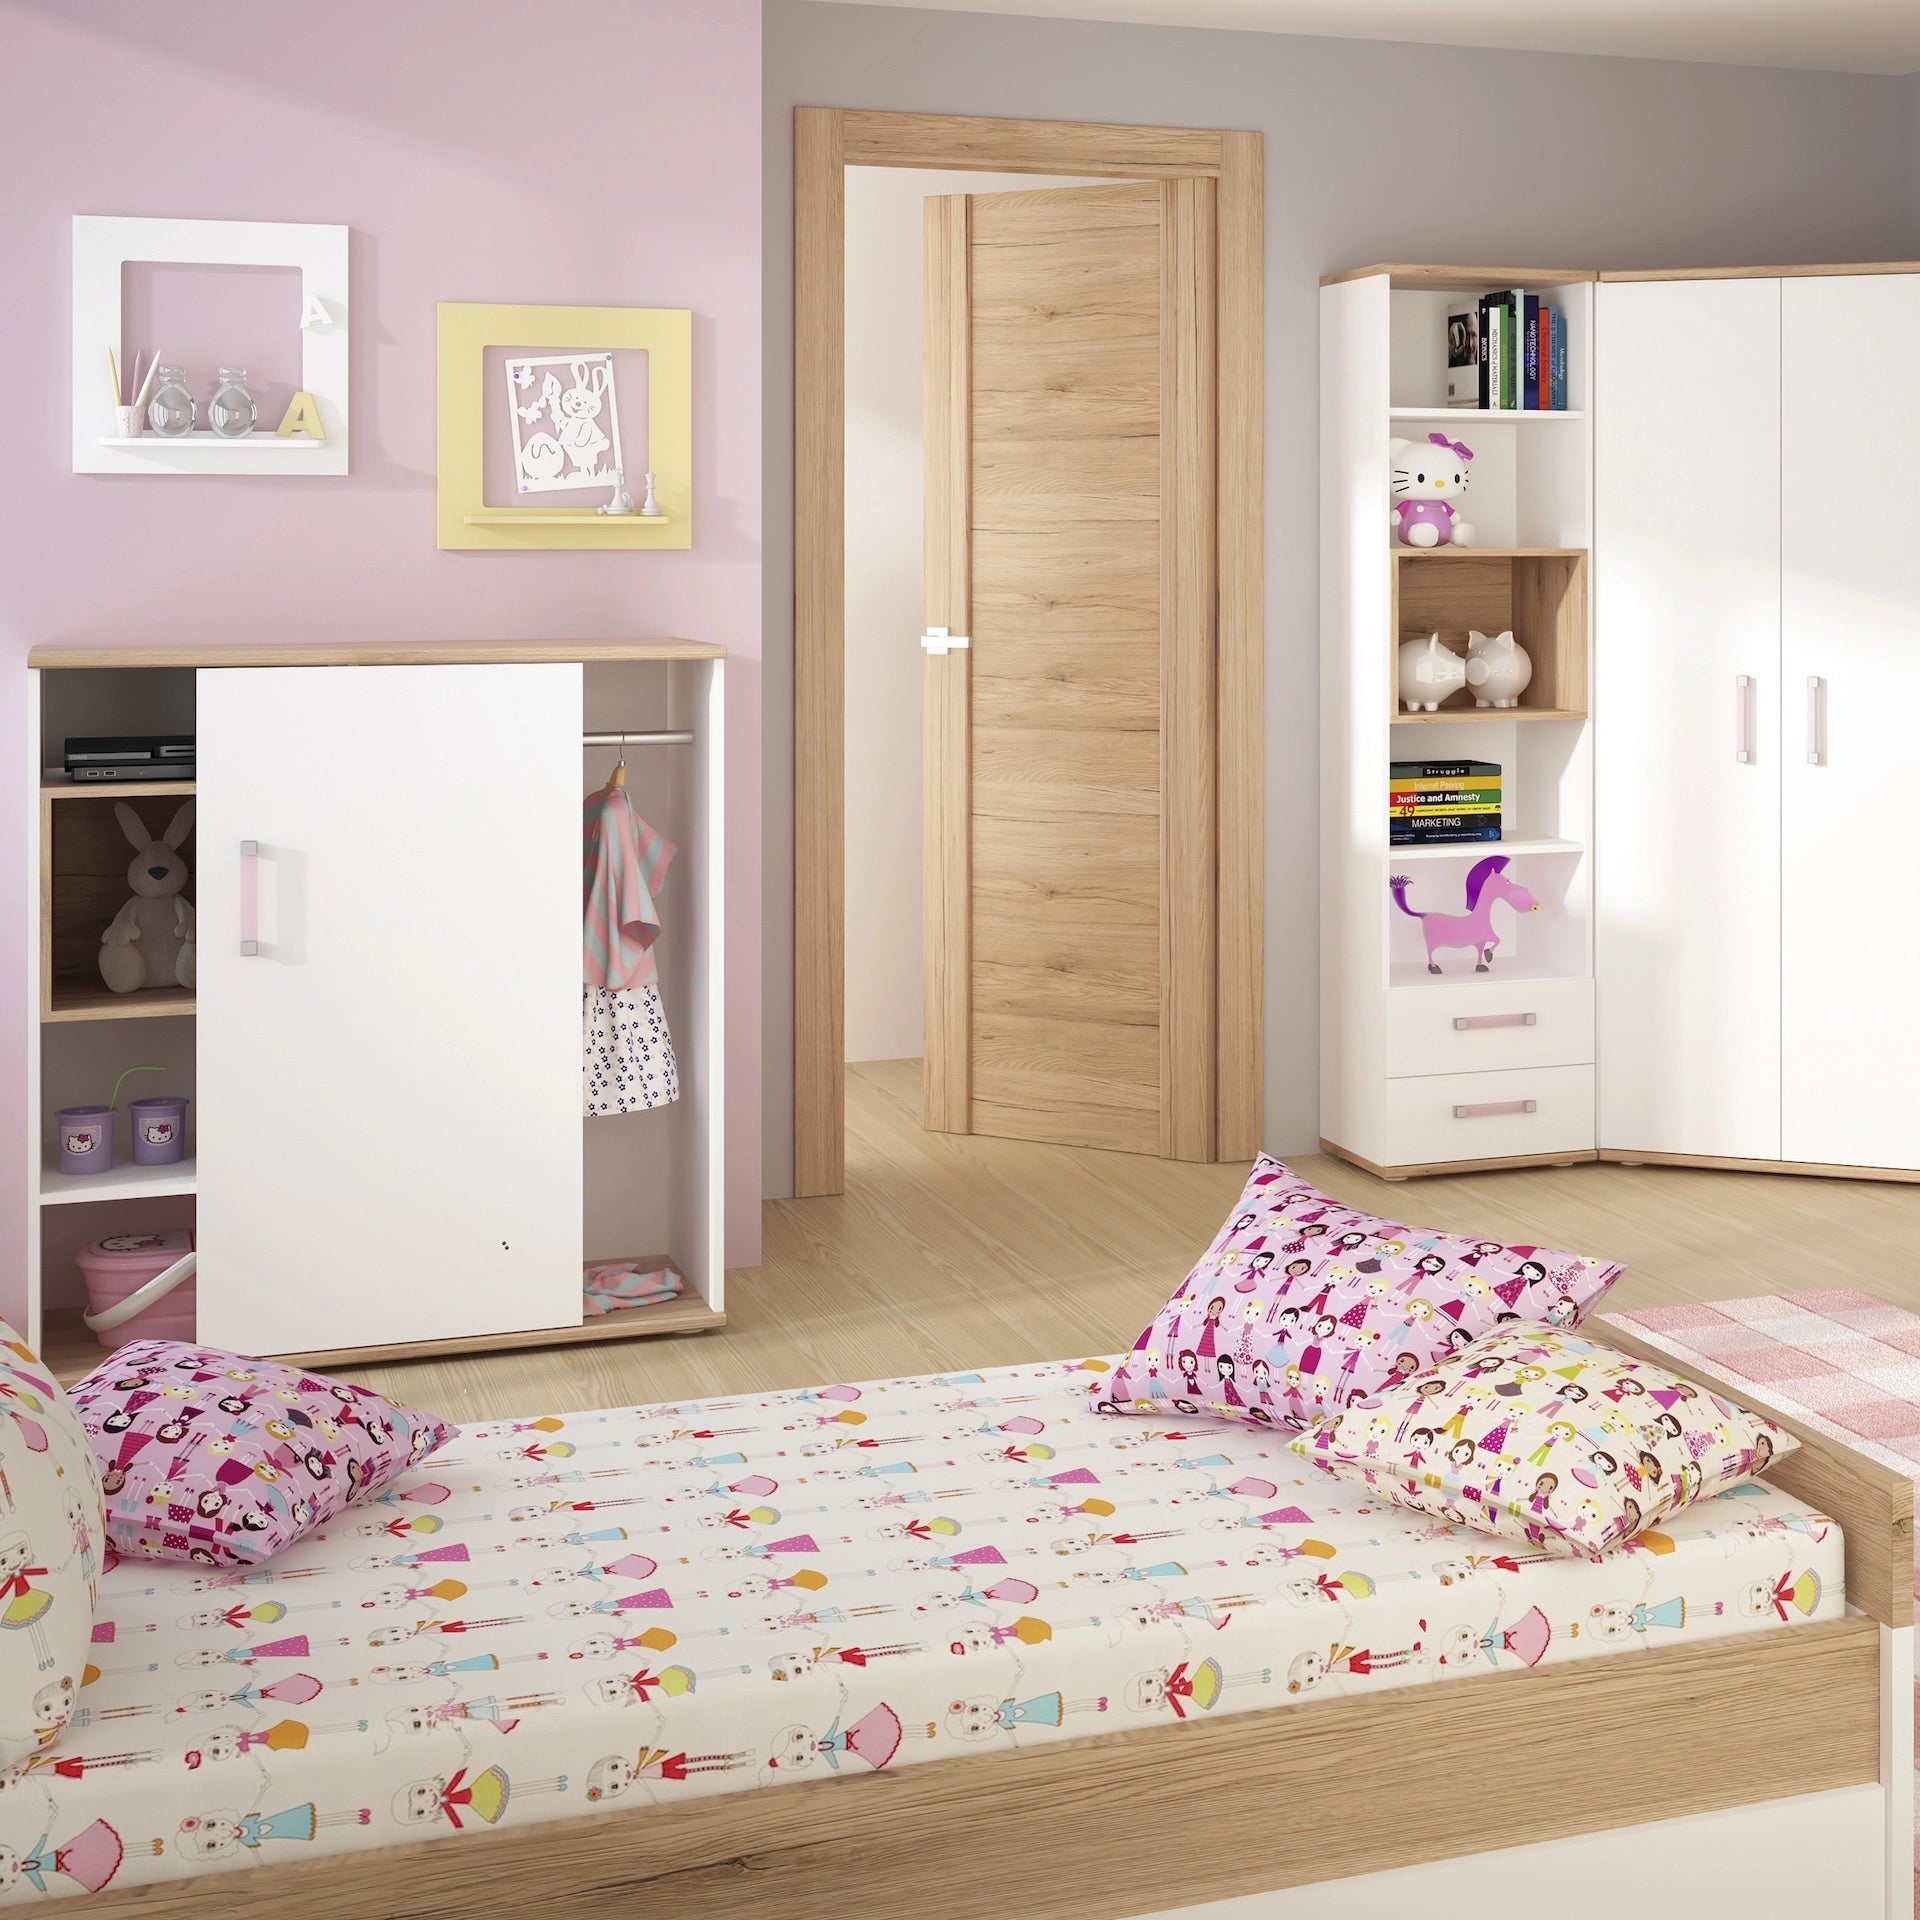 Furniture To Go 4Kids Tall 2 Drawer Bookcase in Light Oak & White High Gloss (Lilac Handles)